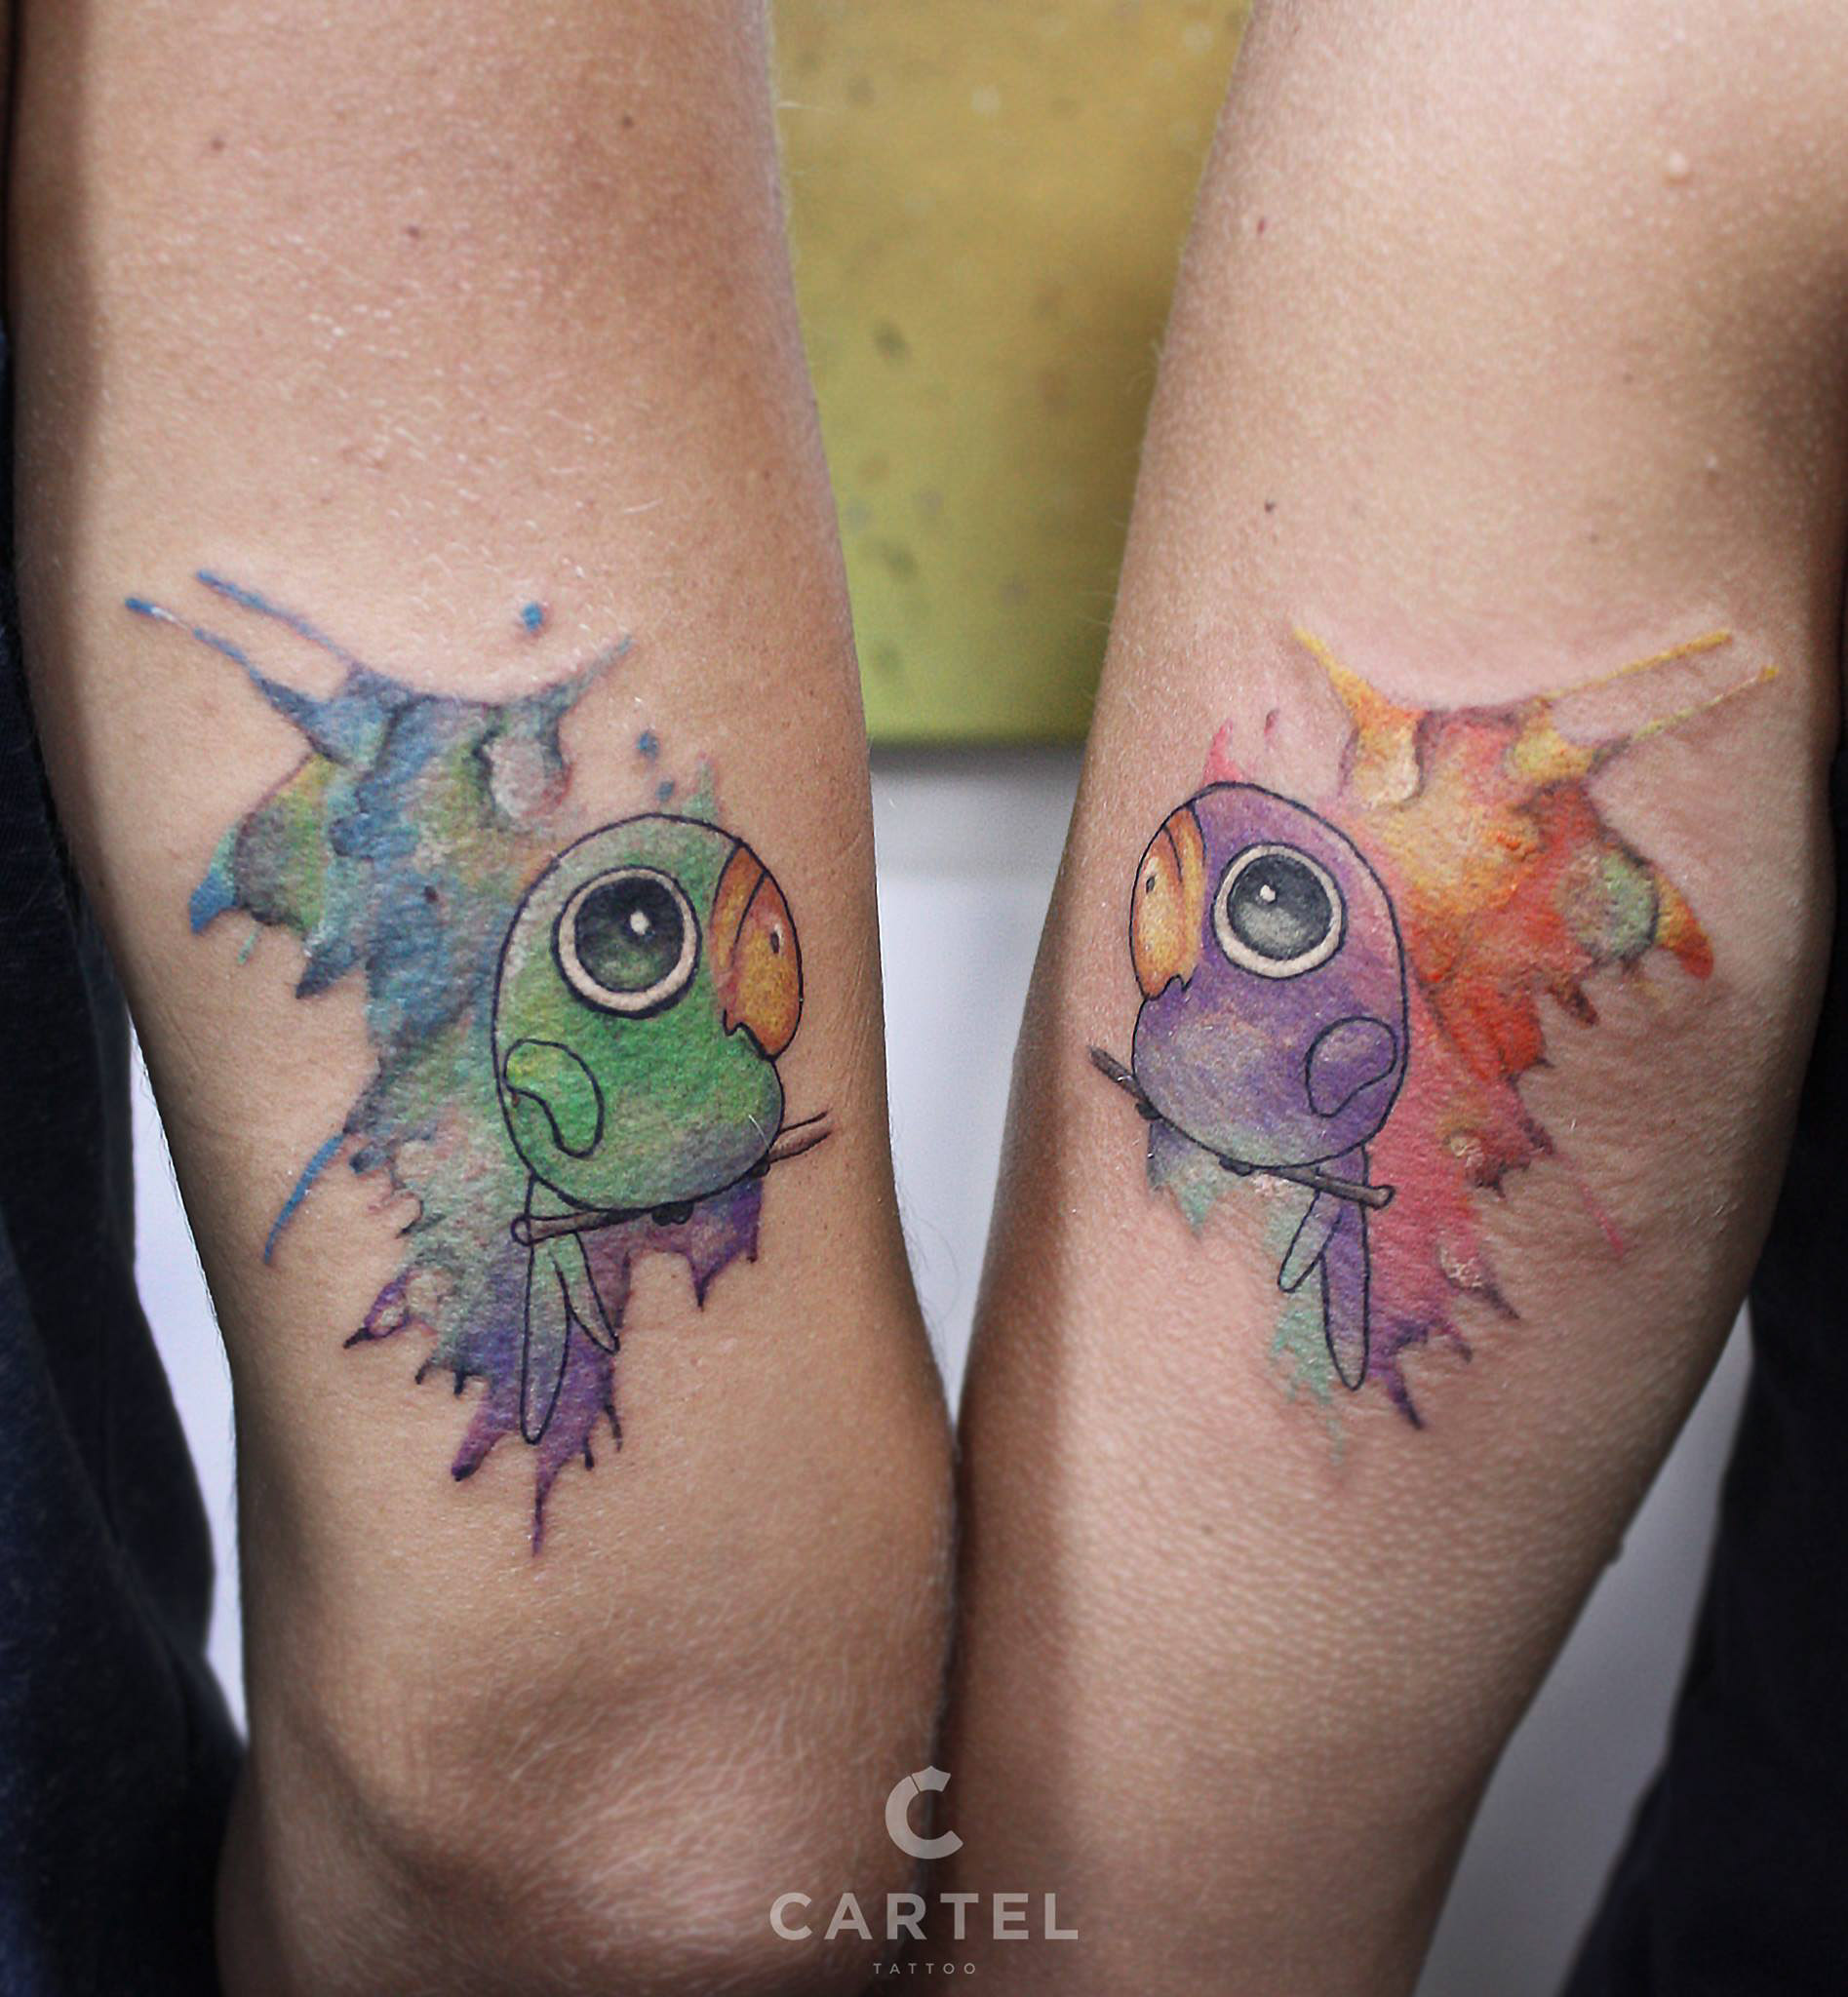 10 Creative Watercolor Tattoo Designs for Art Lovers